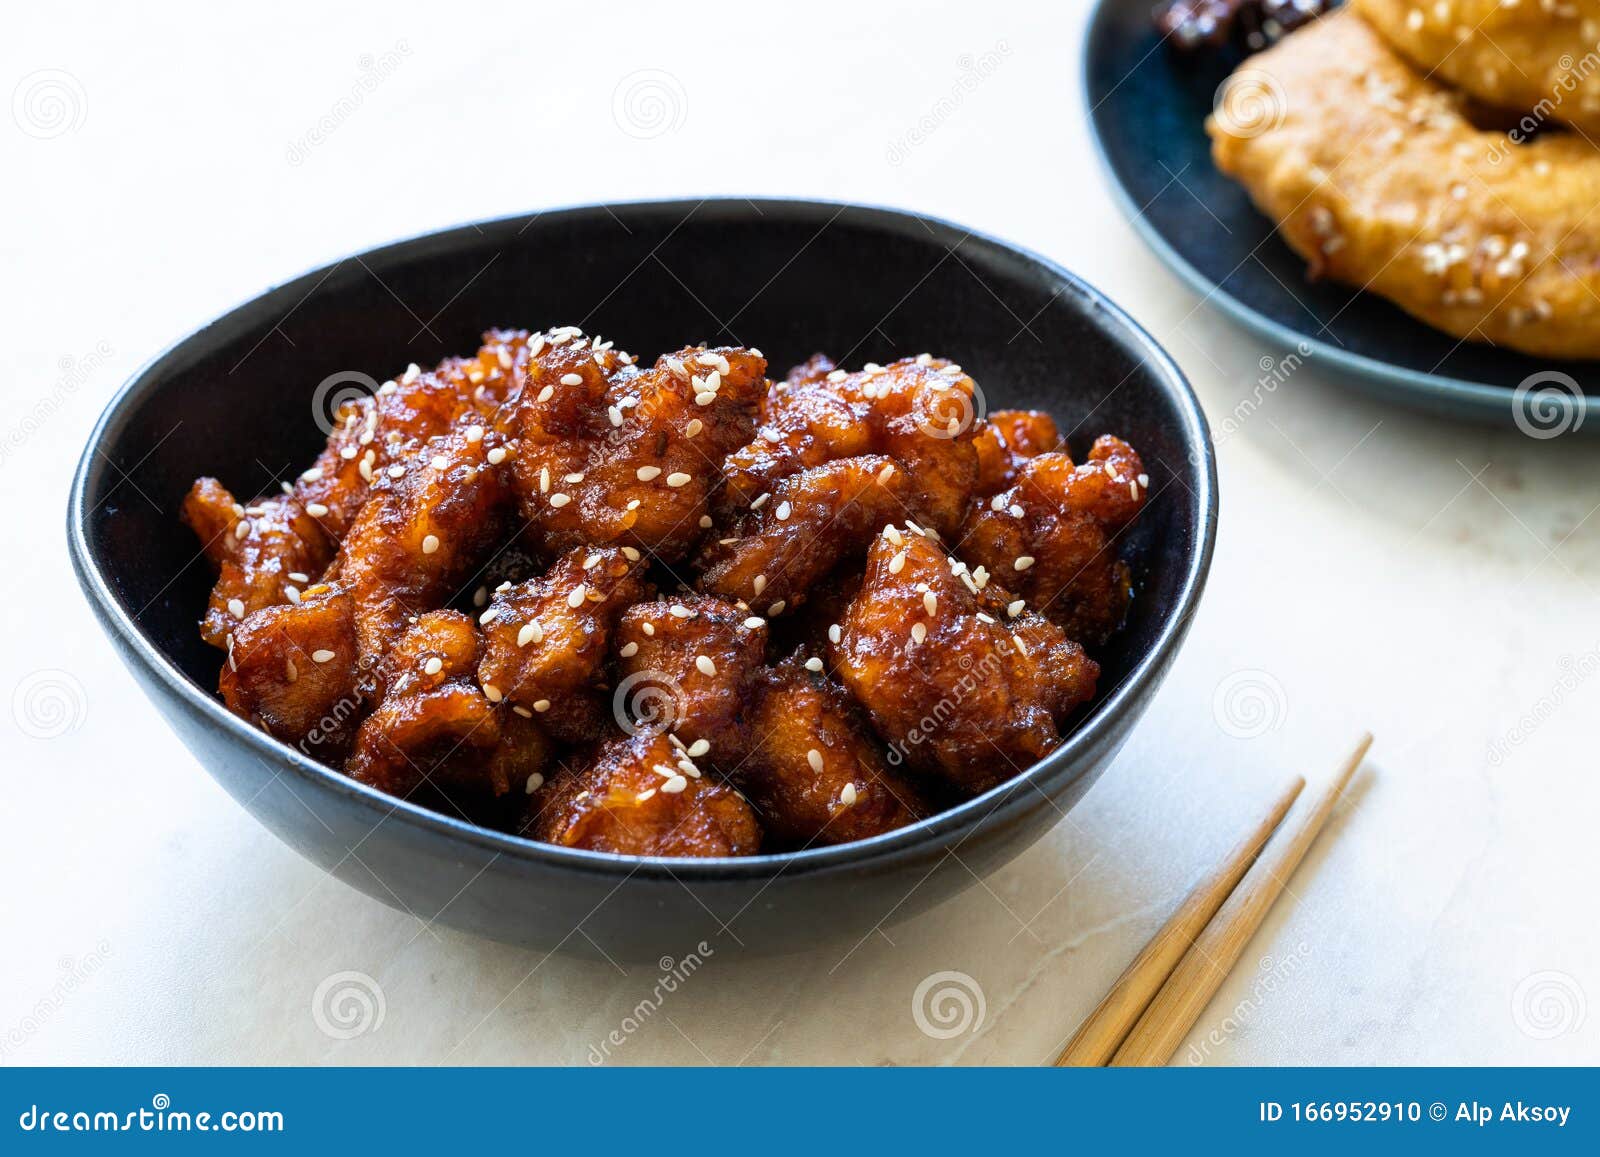 Asian Food Homemade Chinese General Tsos Chicken with Sesame Seeds ...